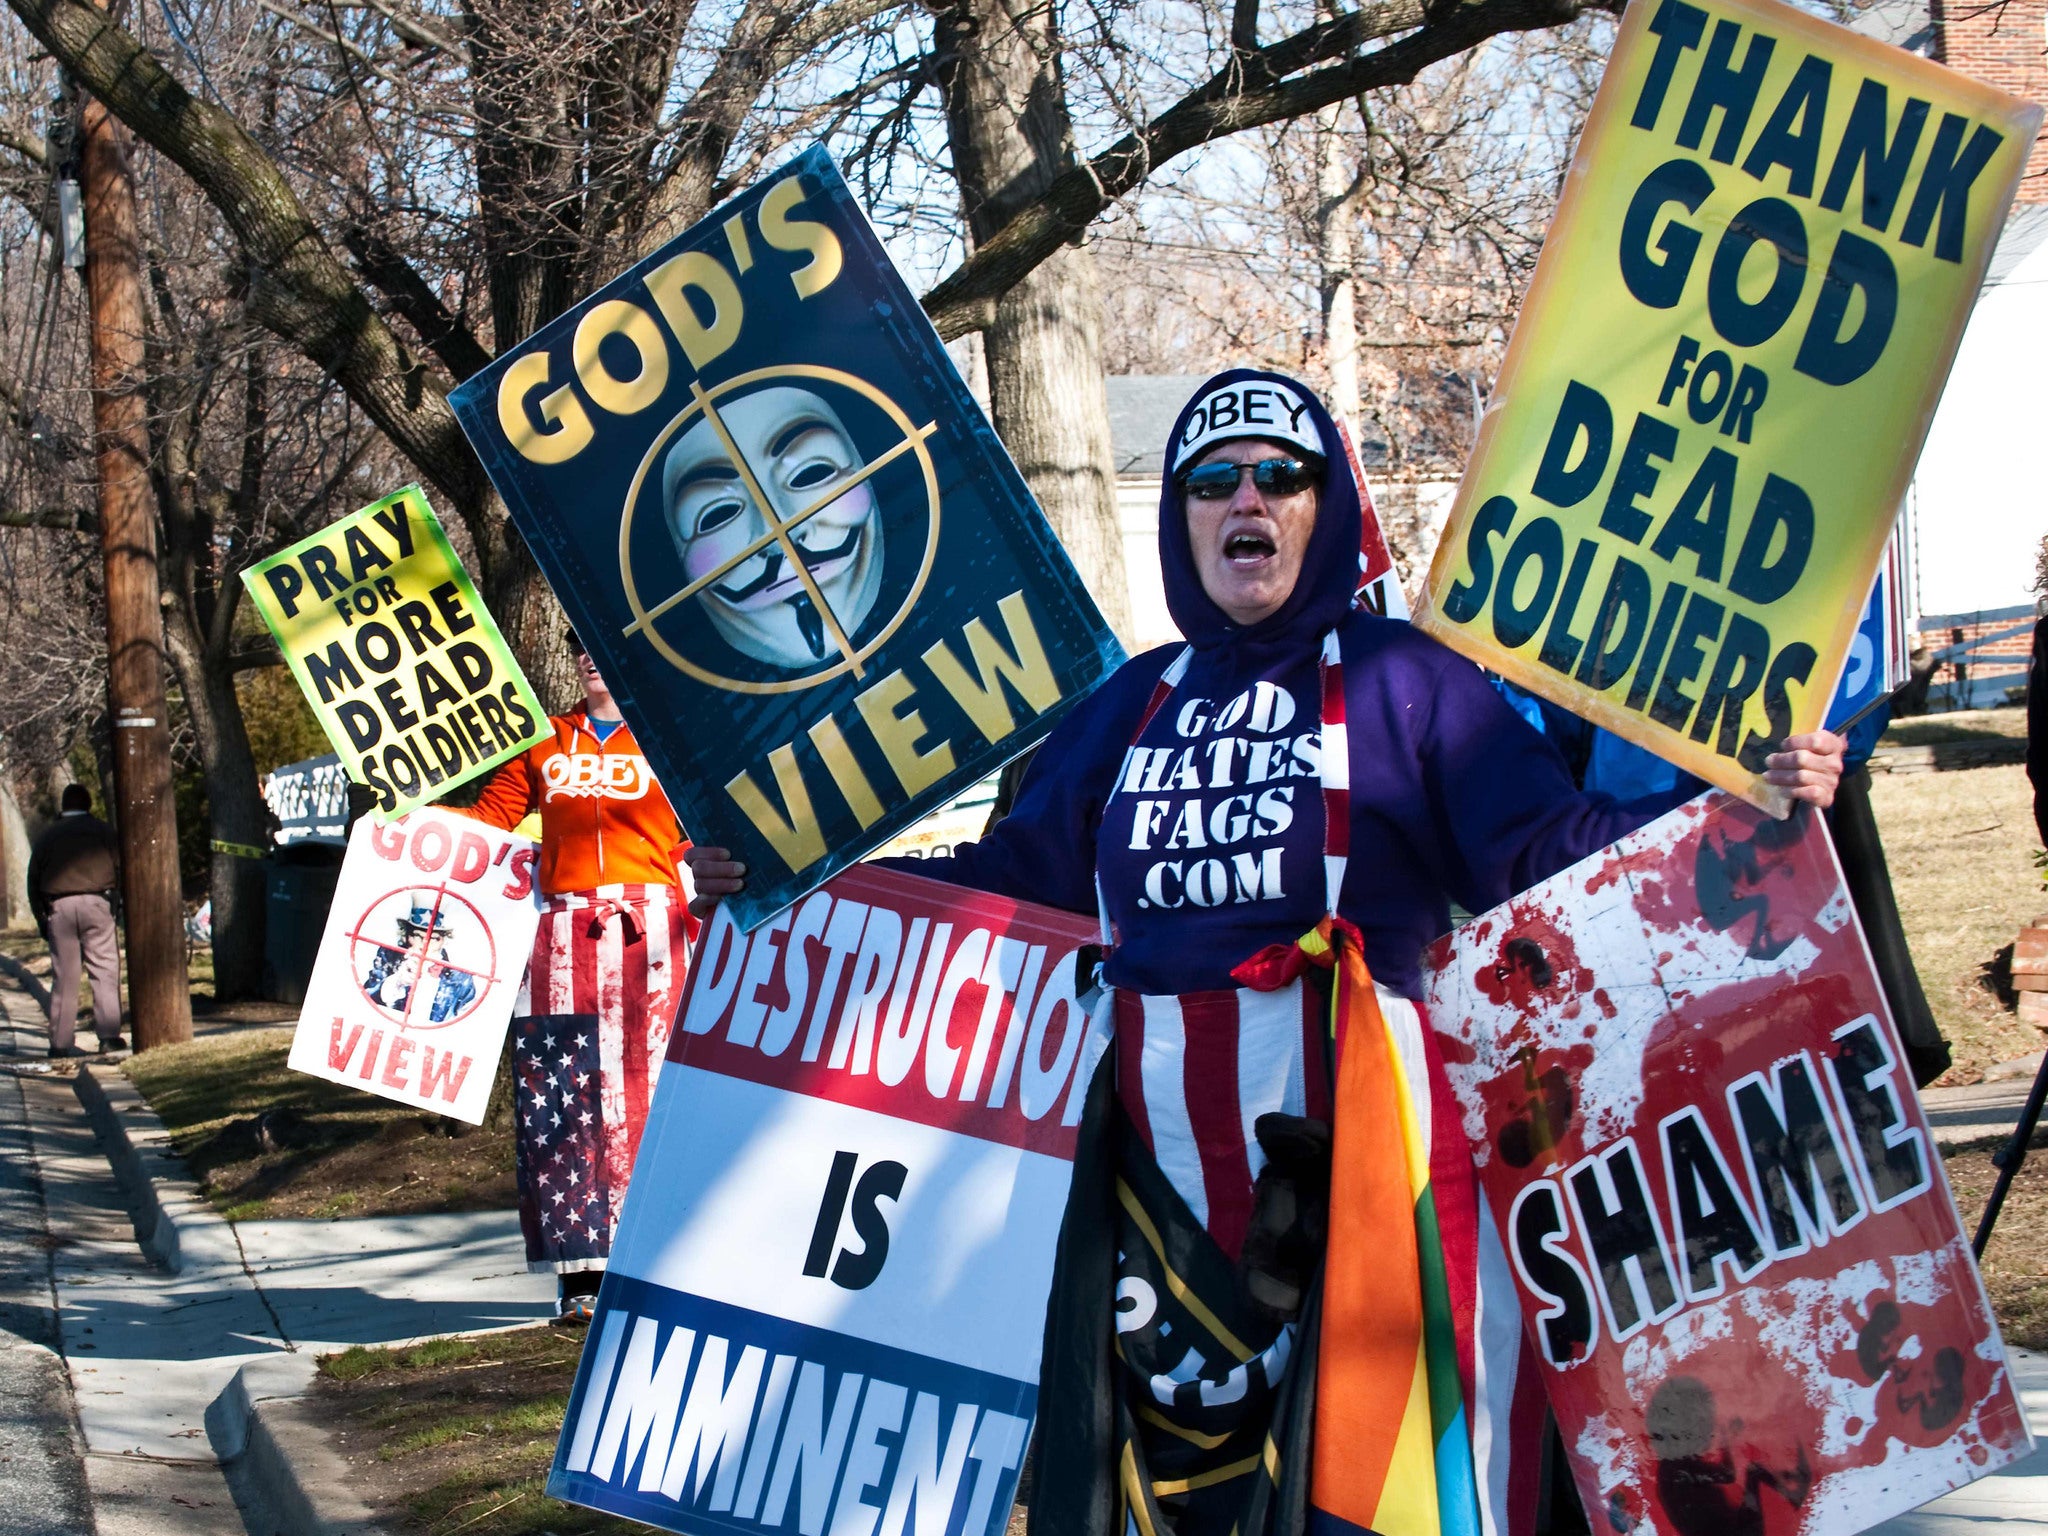 Shirley Phelps-Roper of the Westboro Baptist Church, Kansas, stages a protest across the street from a high school near Washington